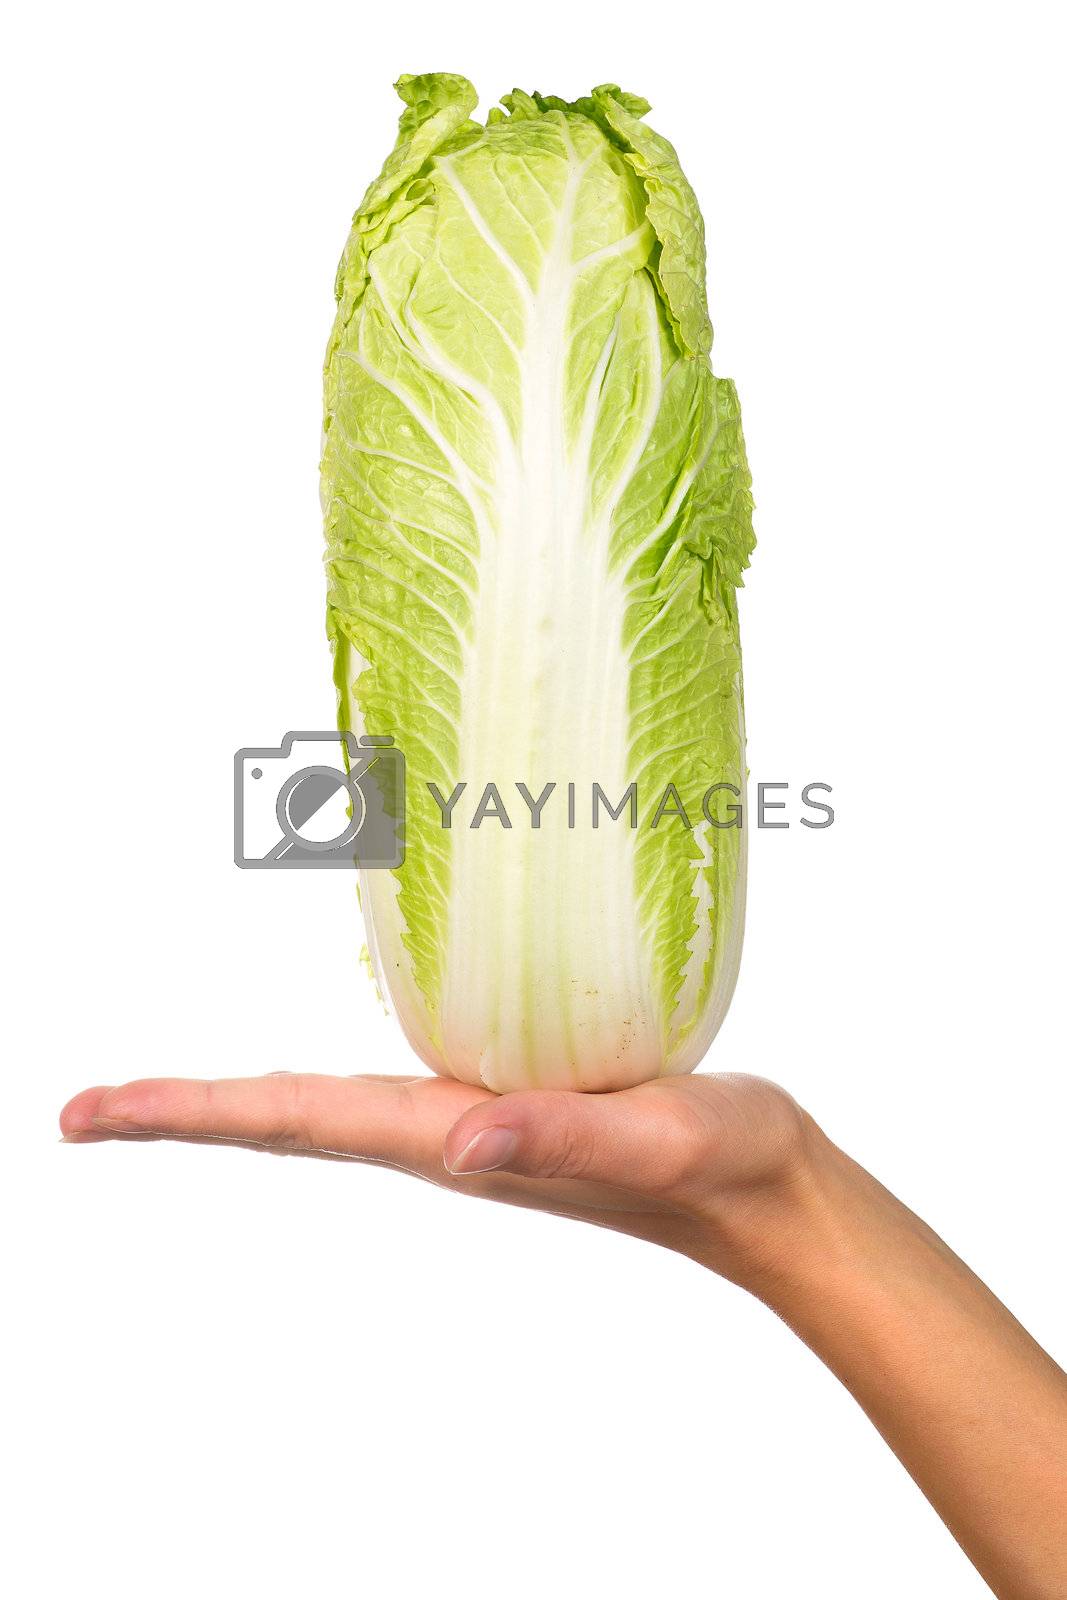 Royalty free image of Hand with a cabbage by timbrk